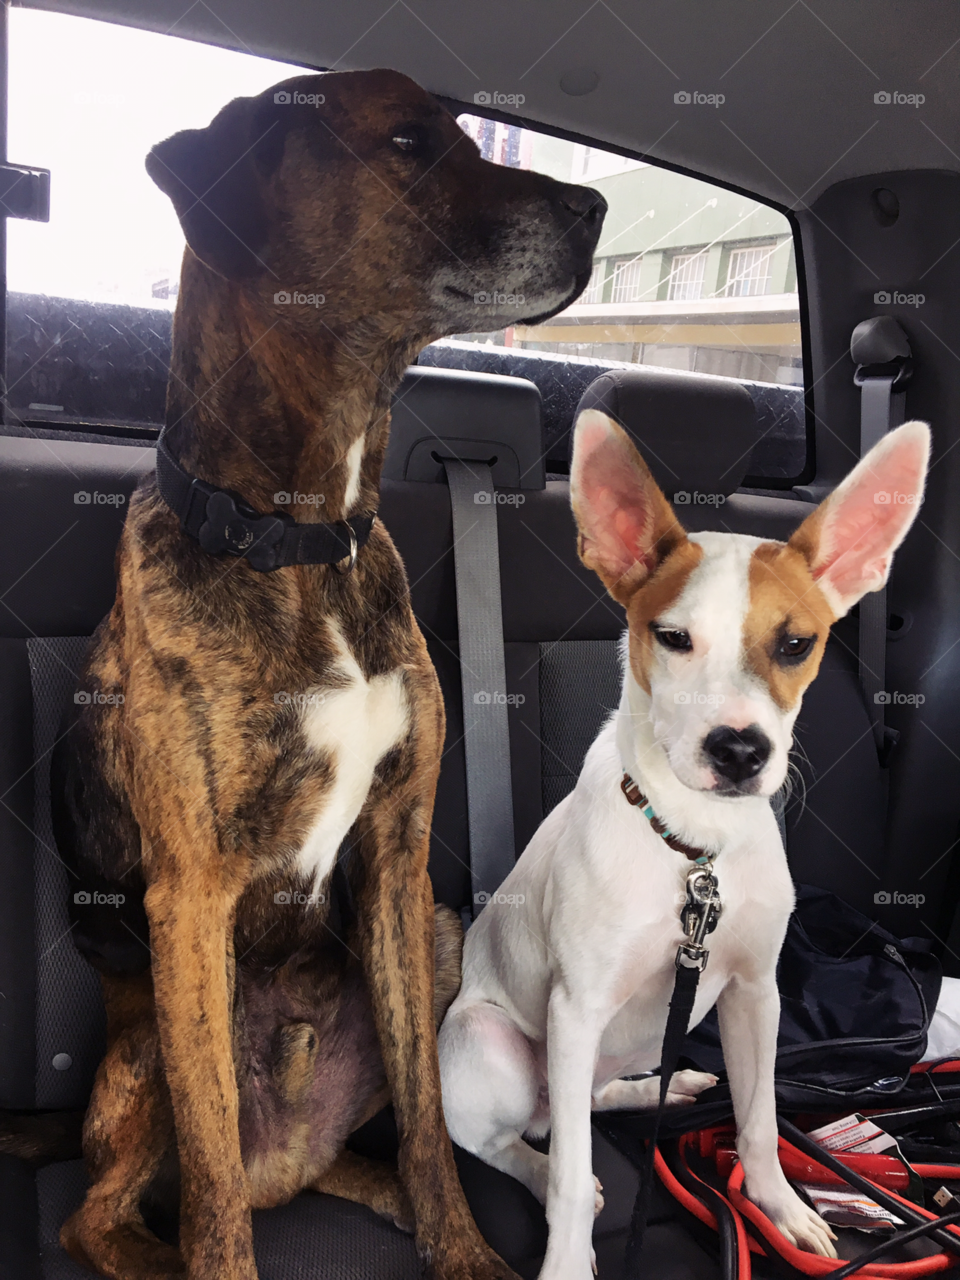 Our dogs Nimbus & Atticus in the back seat